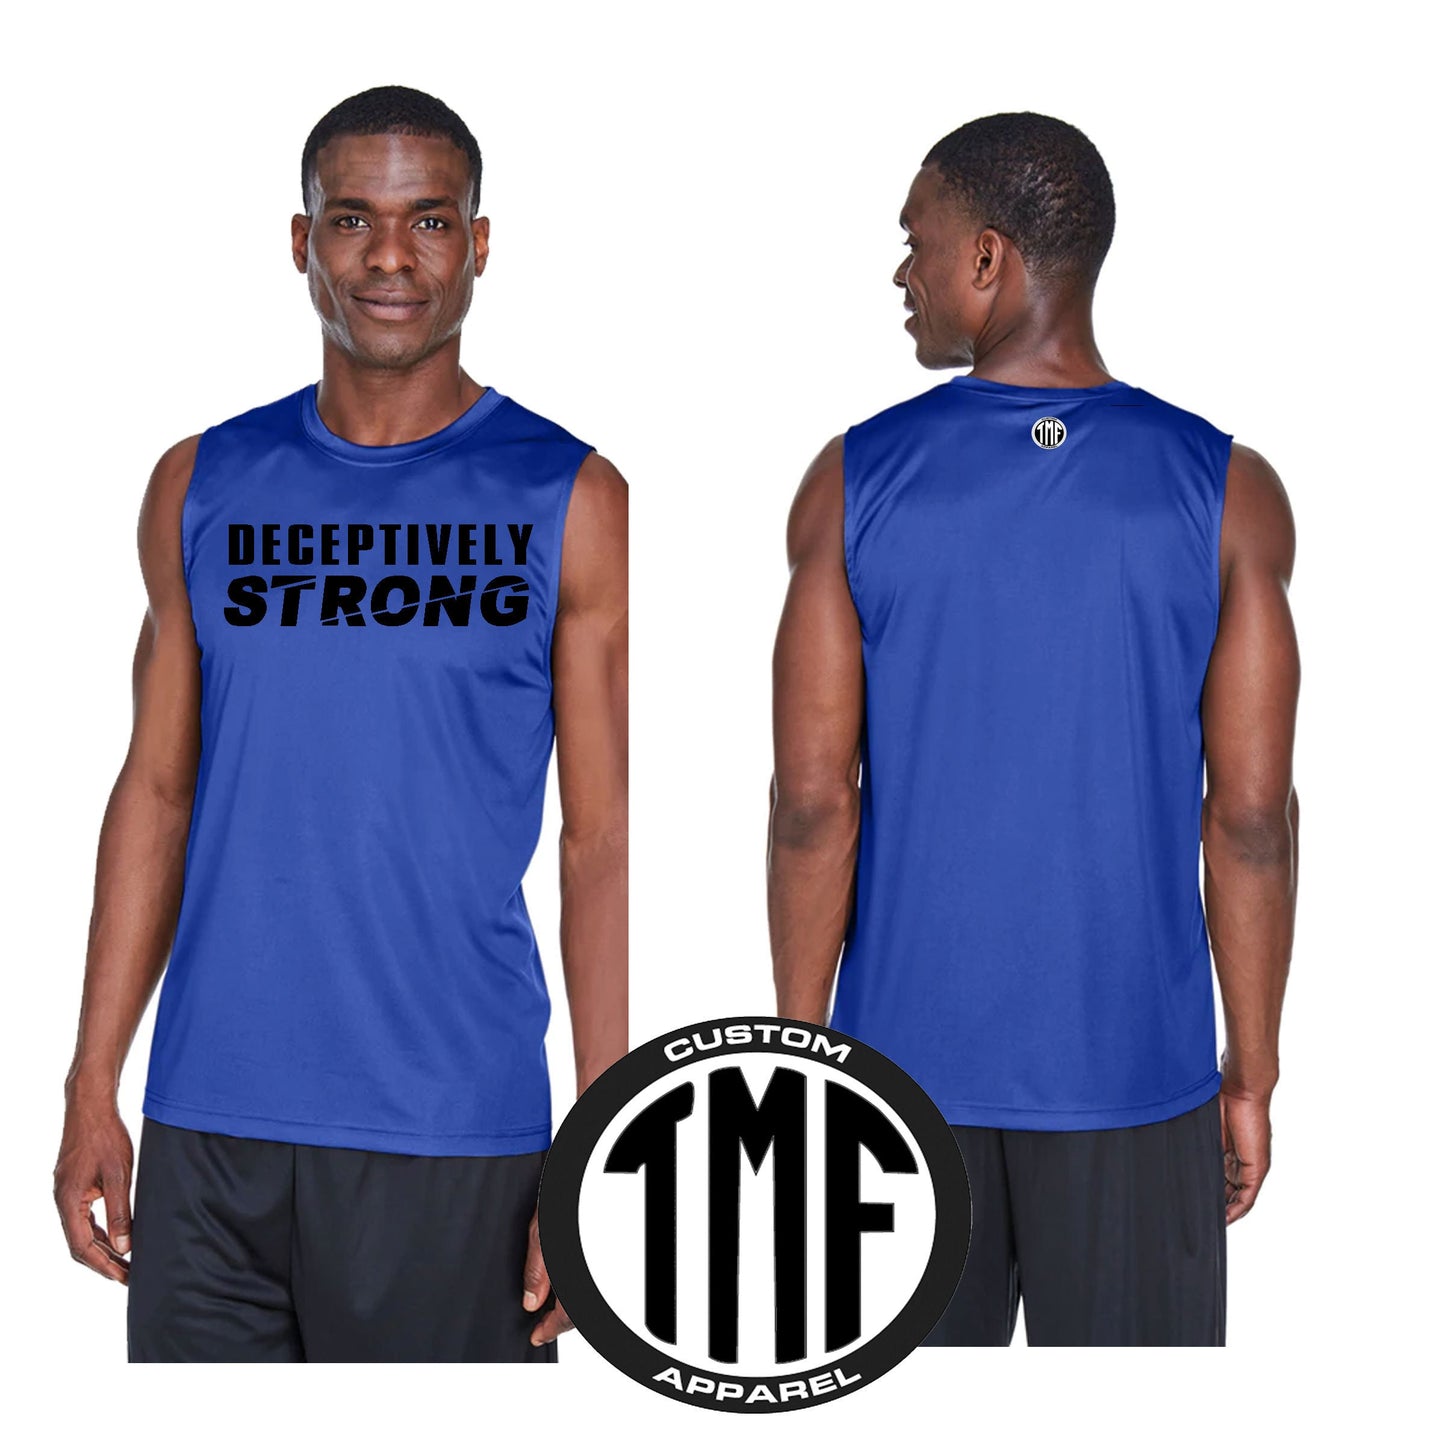 DECEPTIVELY STRONG - Mens Gym Tank